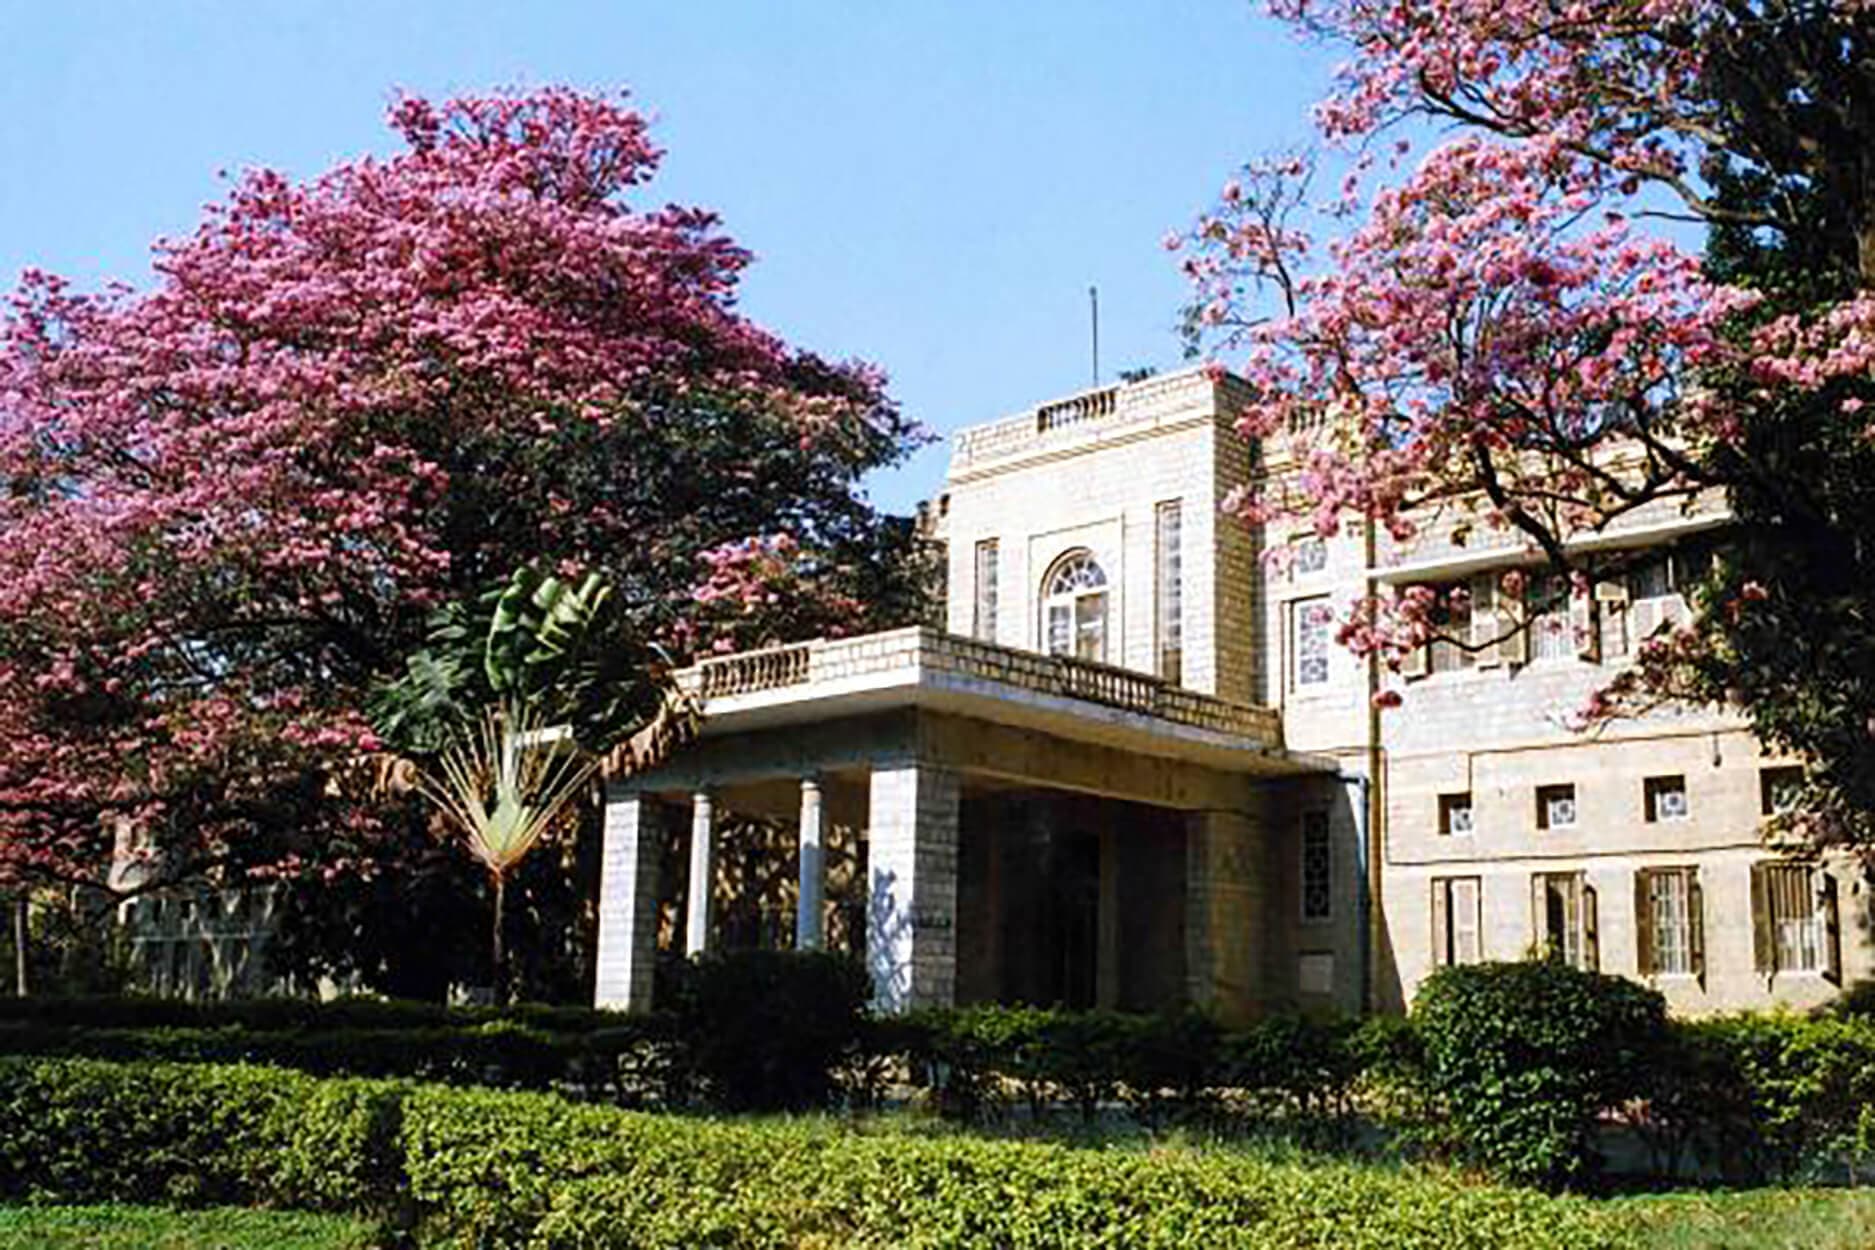 The entrance to a large white building, flanked by pink trees in bloom and a short hedge